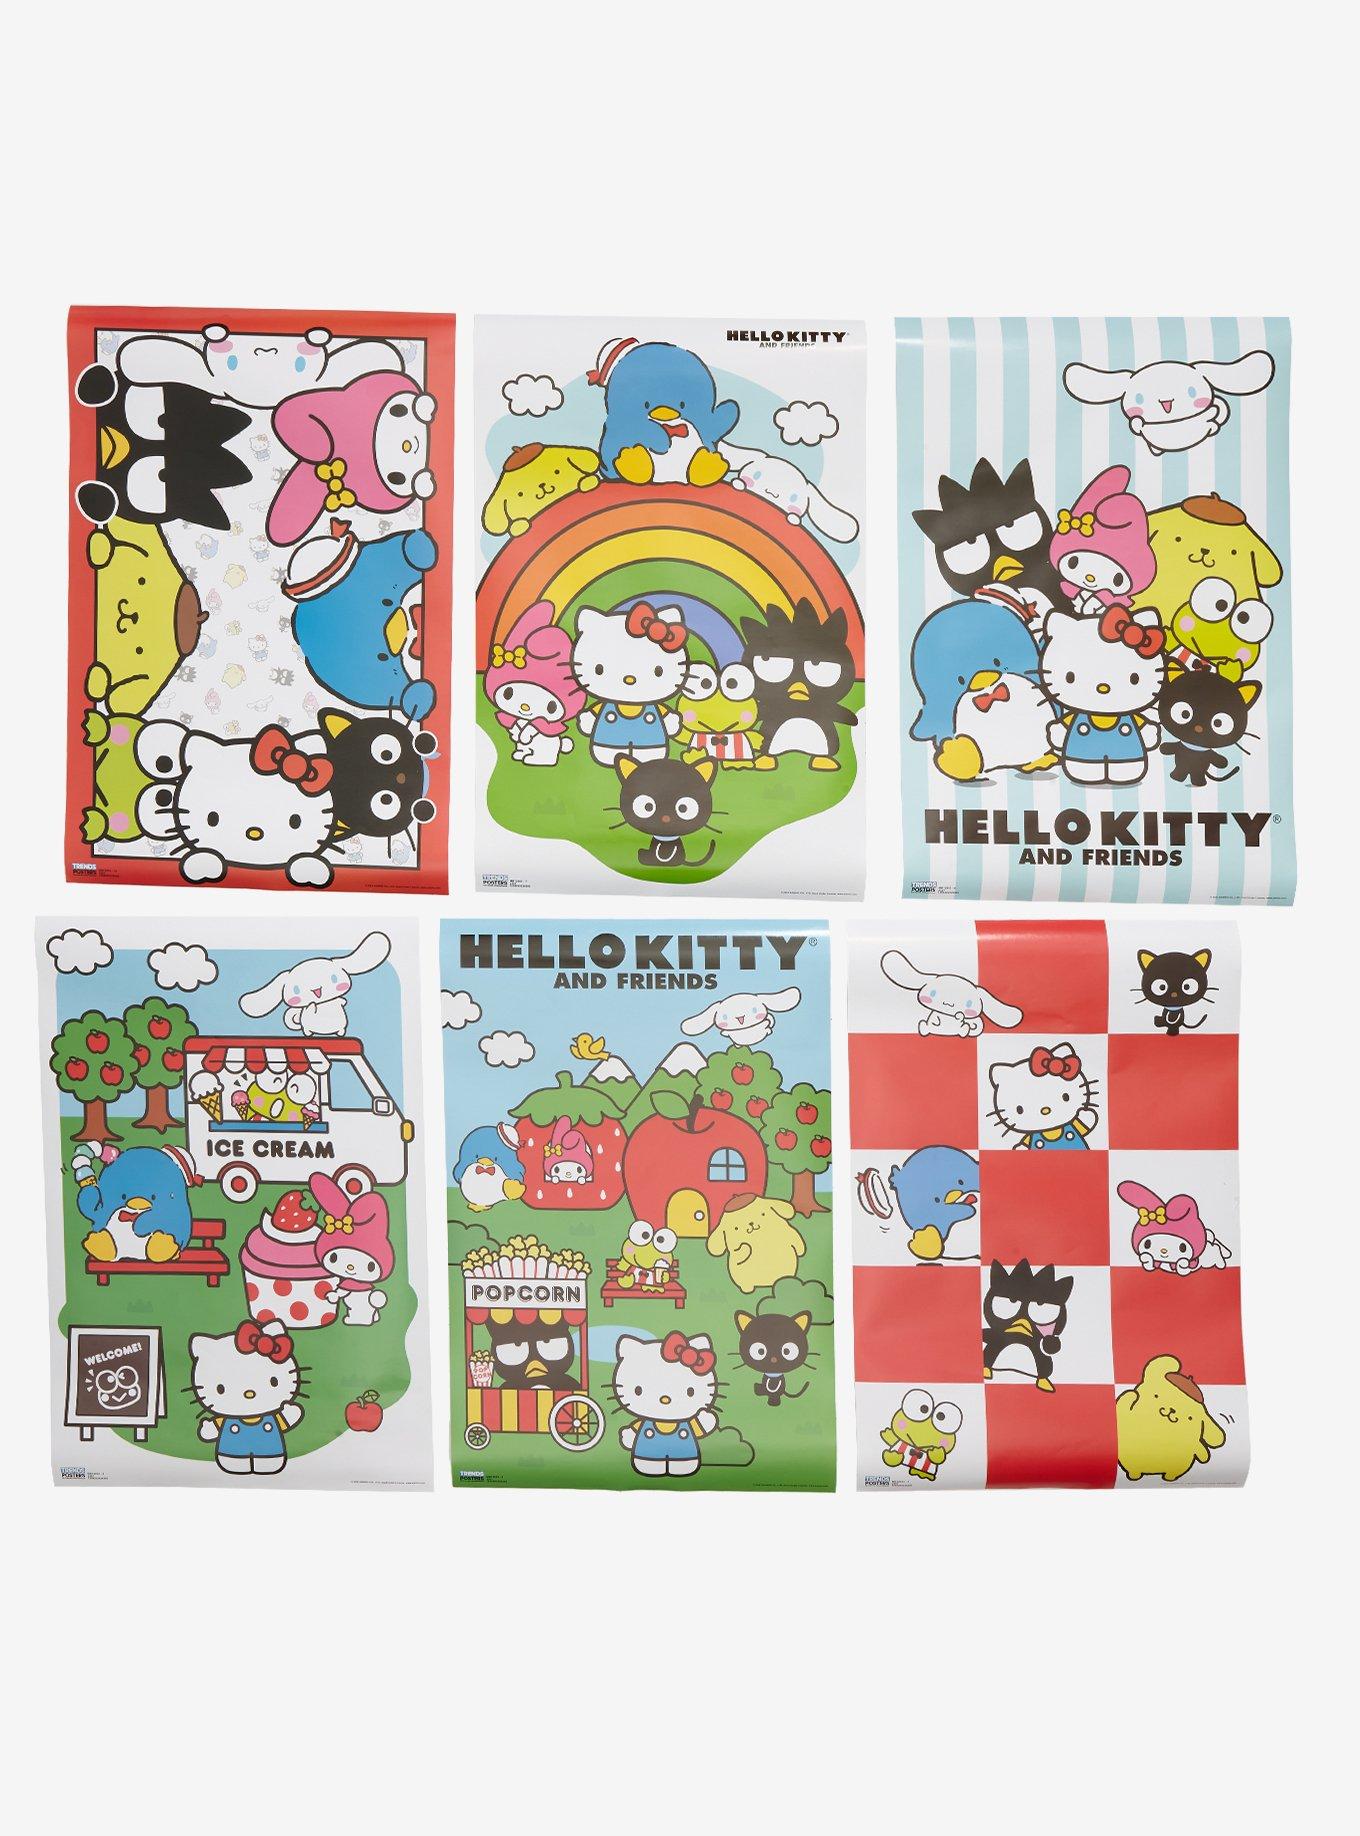  Trends International Hello Kitty - Face Wall Poster